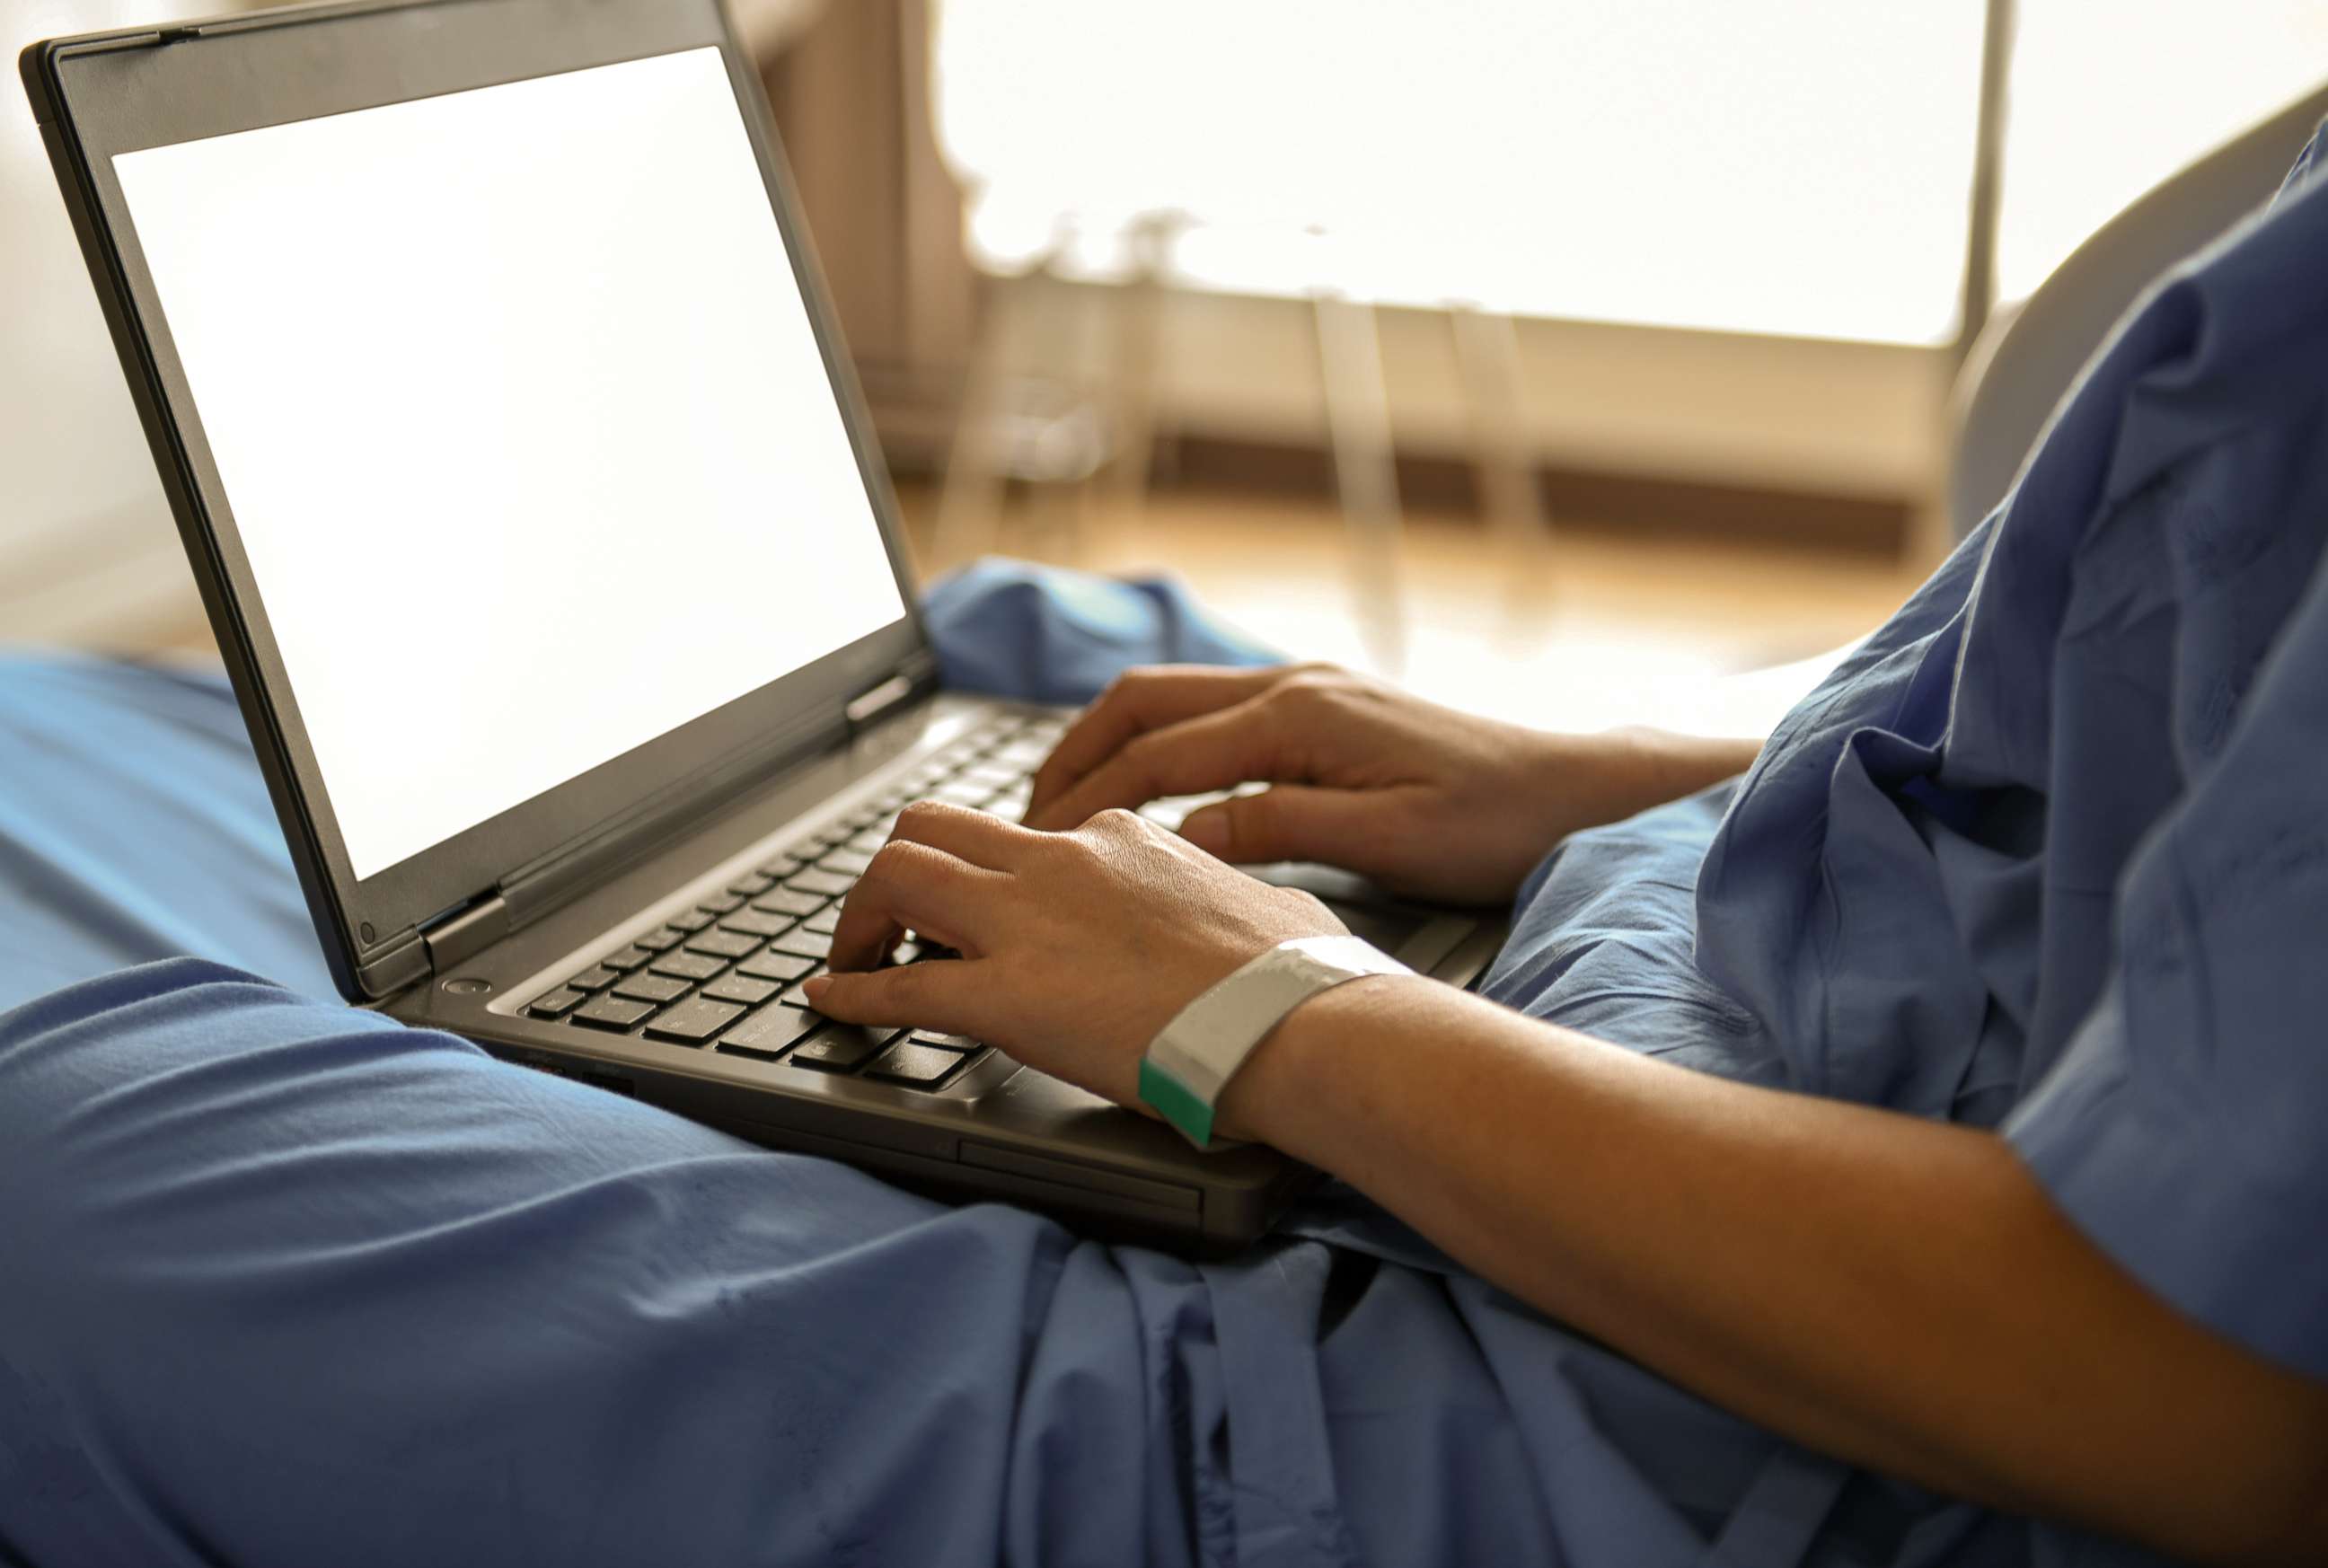 PHOTO: A patient uses a laptop while in the hospital in this stock photo.